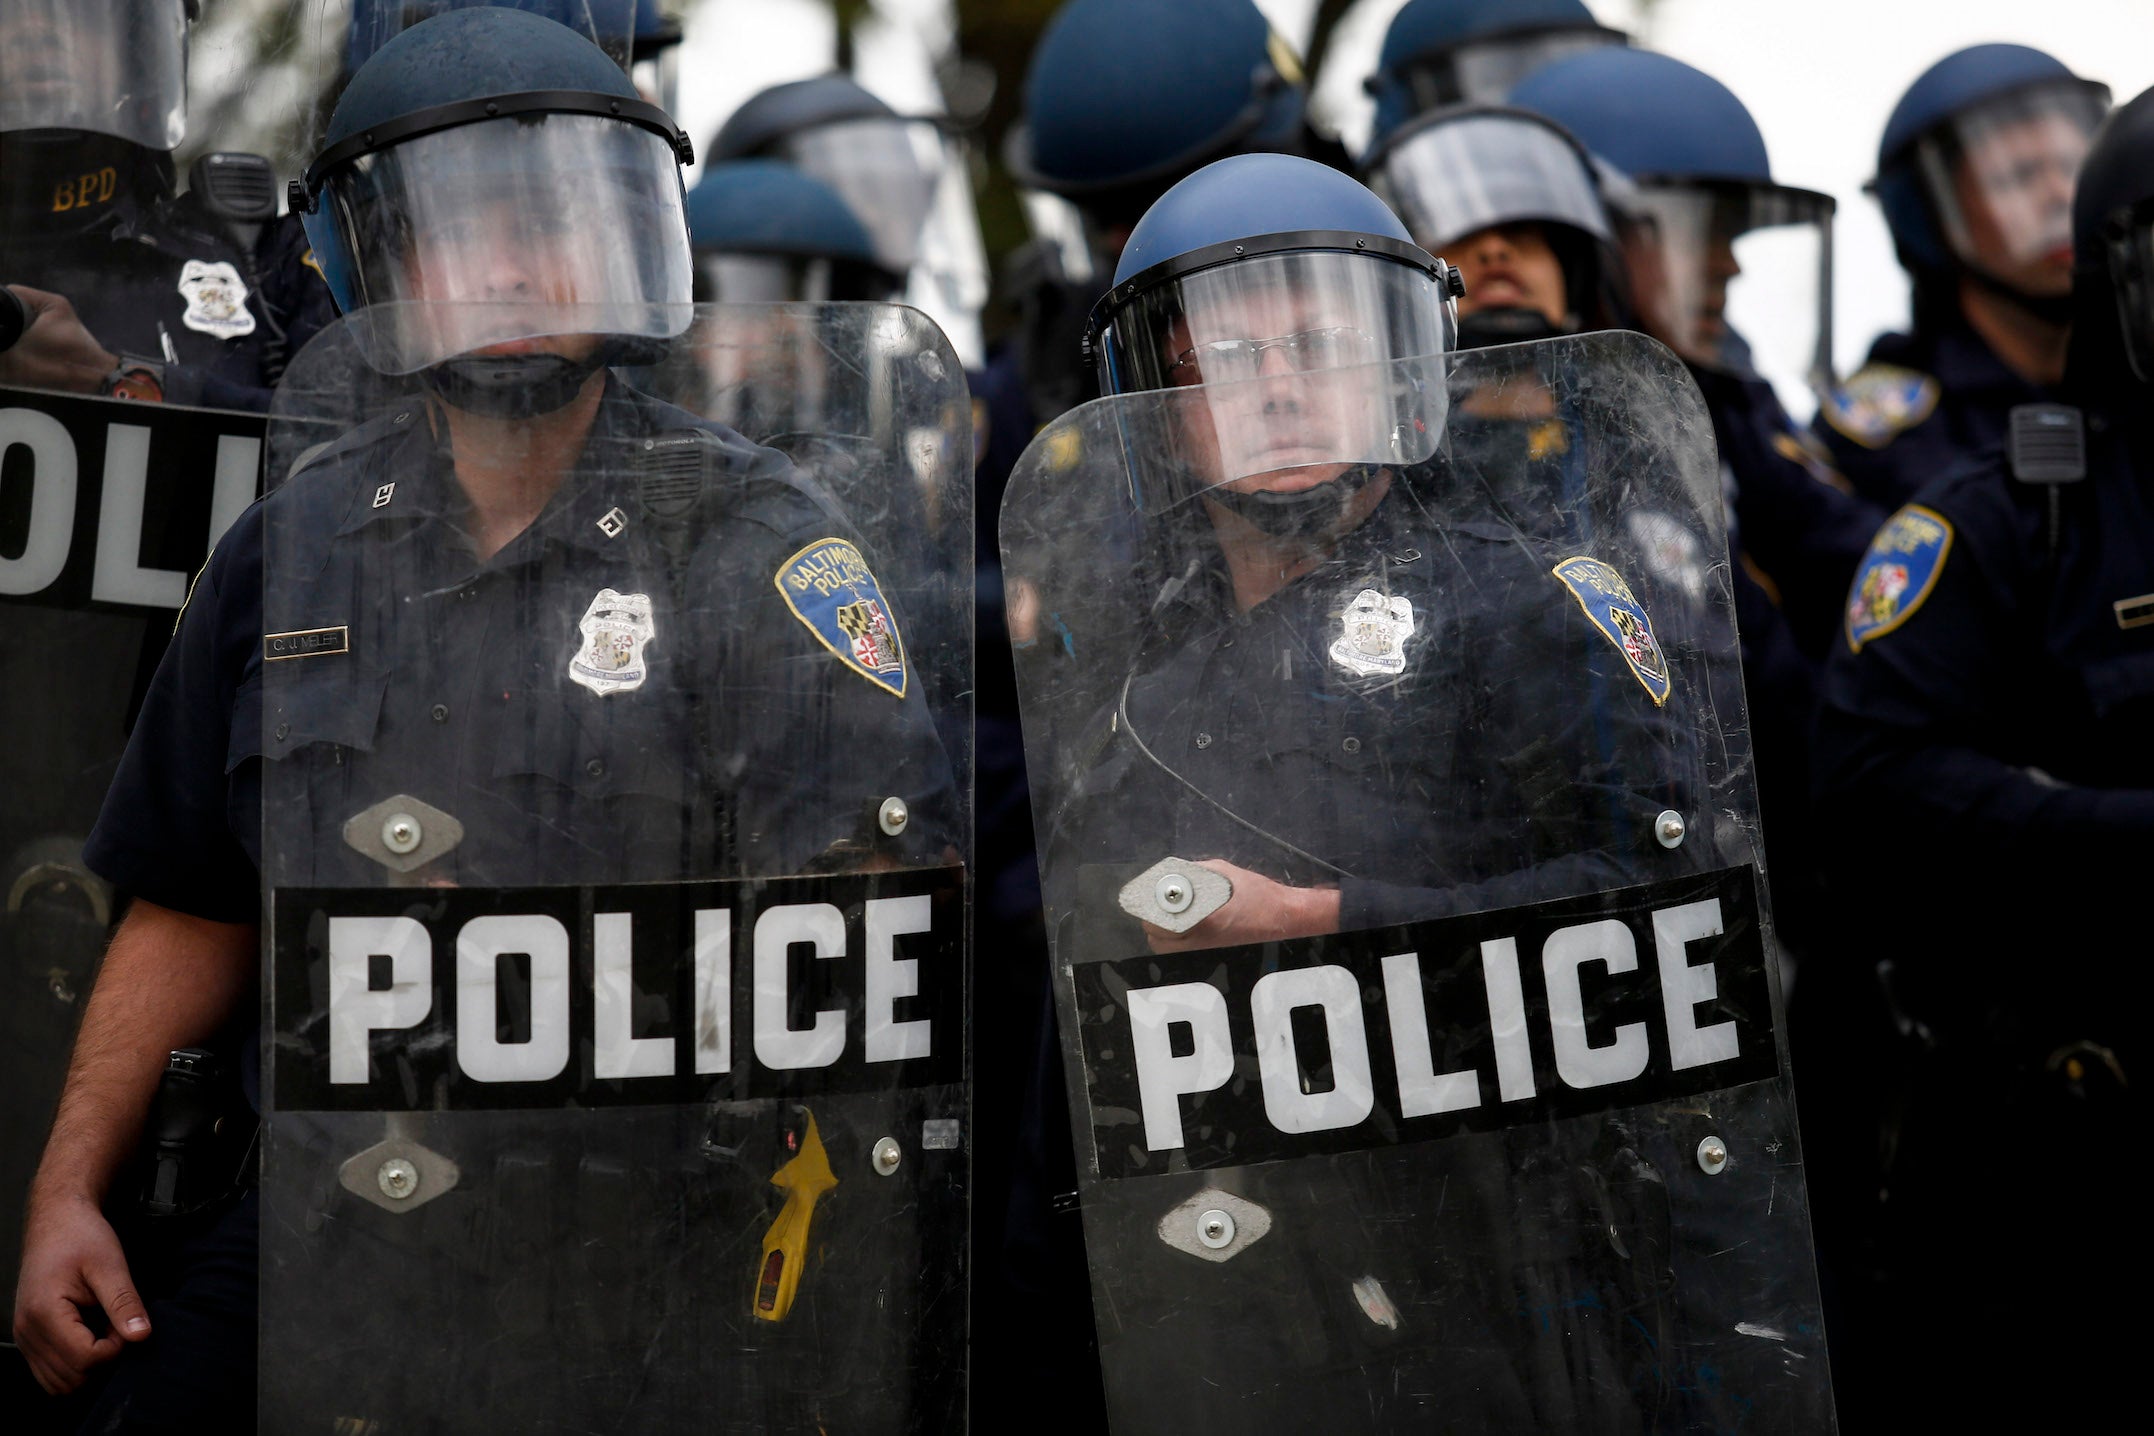 Baltimore Police officers face protesters in Baltimore, Maryland.